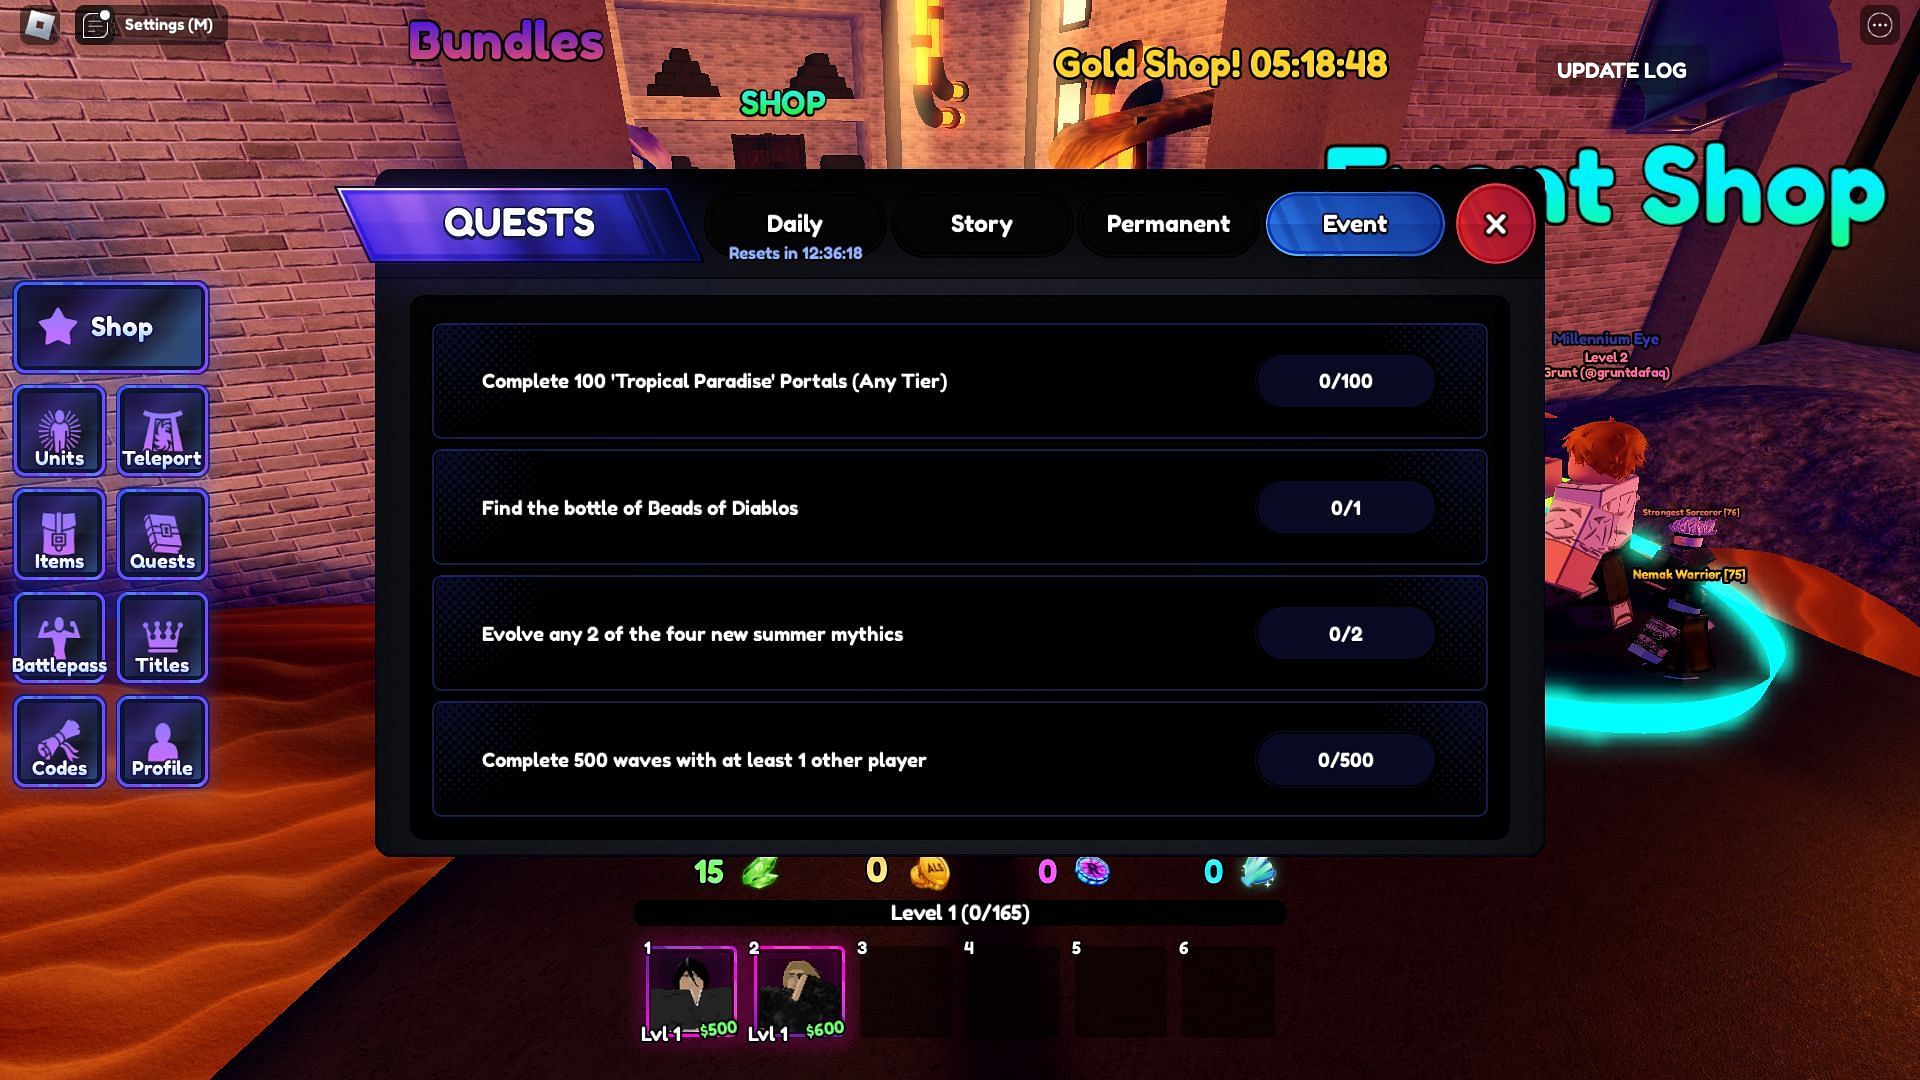 Events tab in the Quest menu (Image via Roblox)